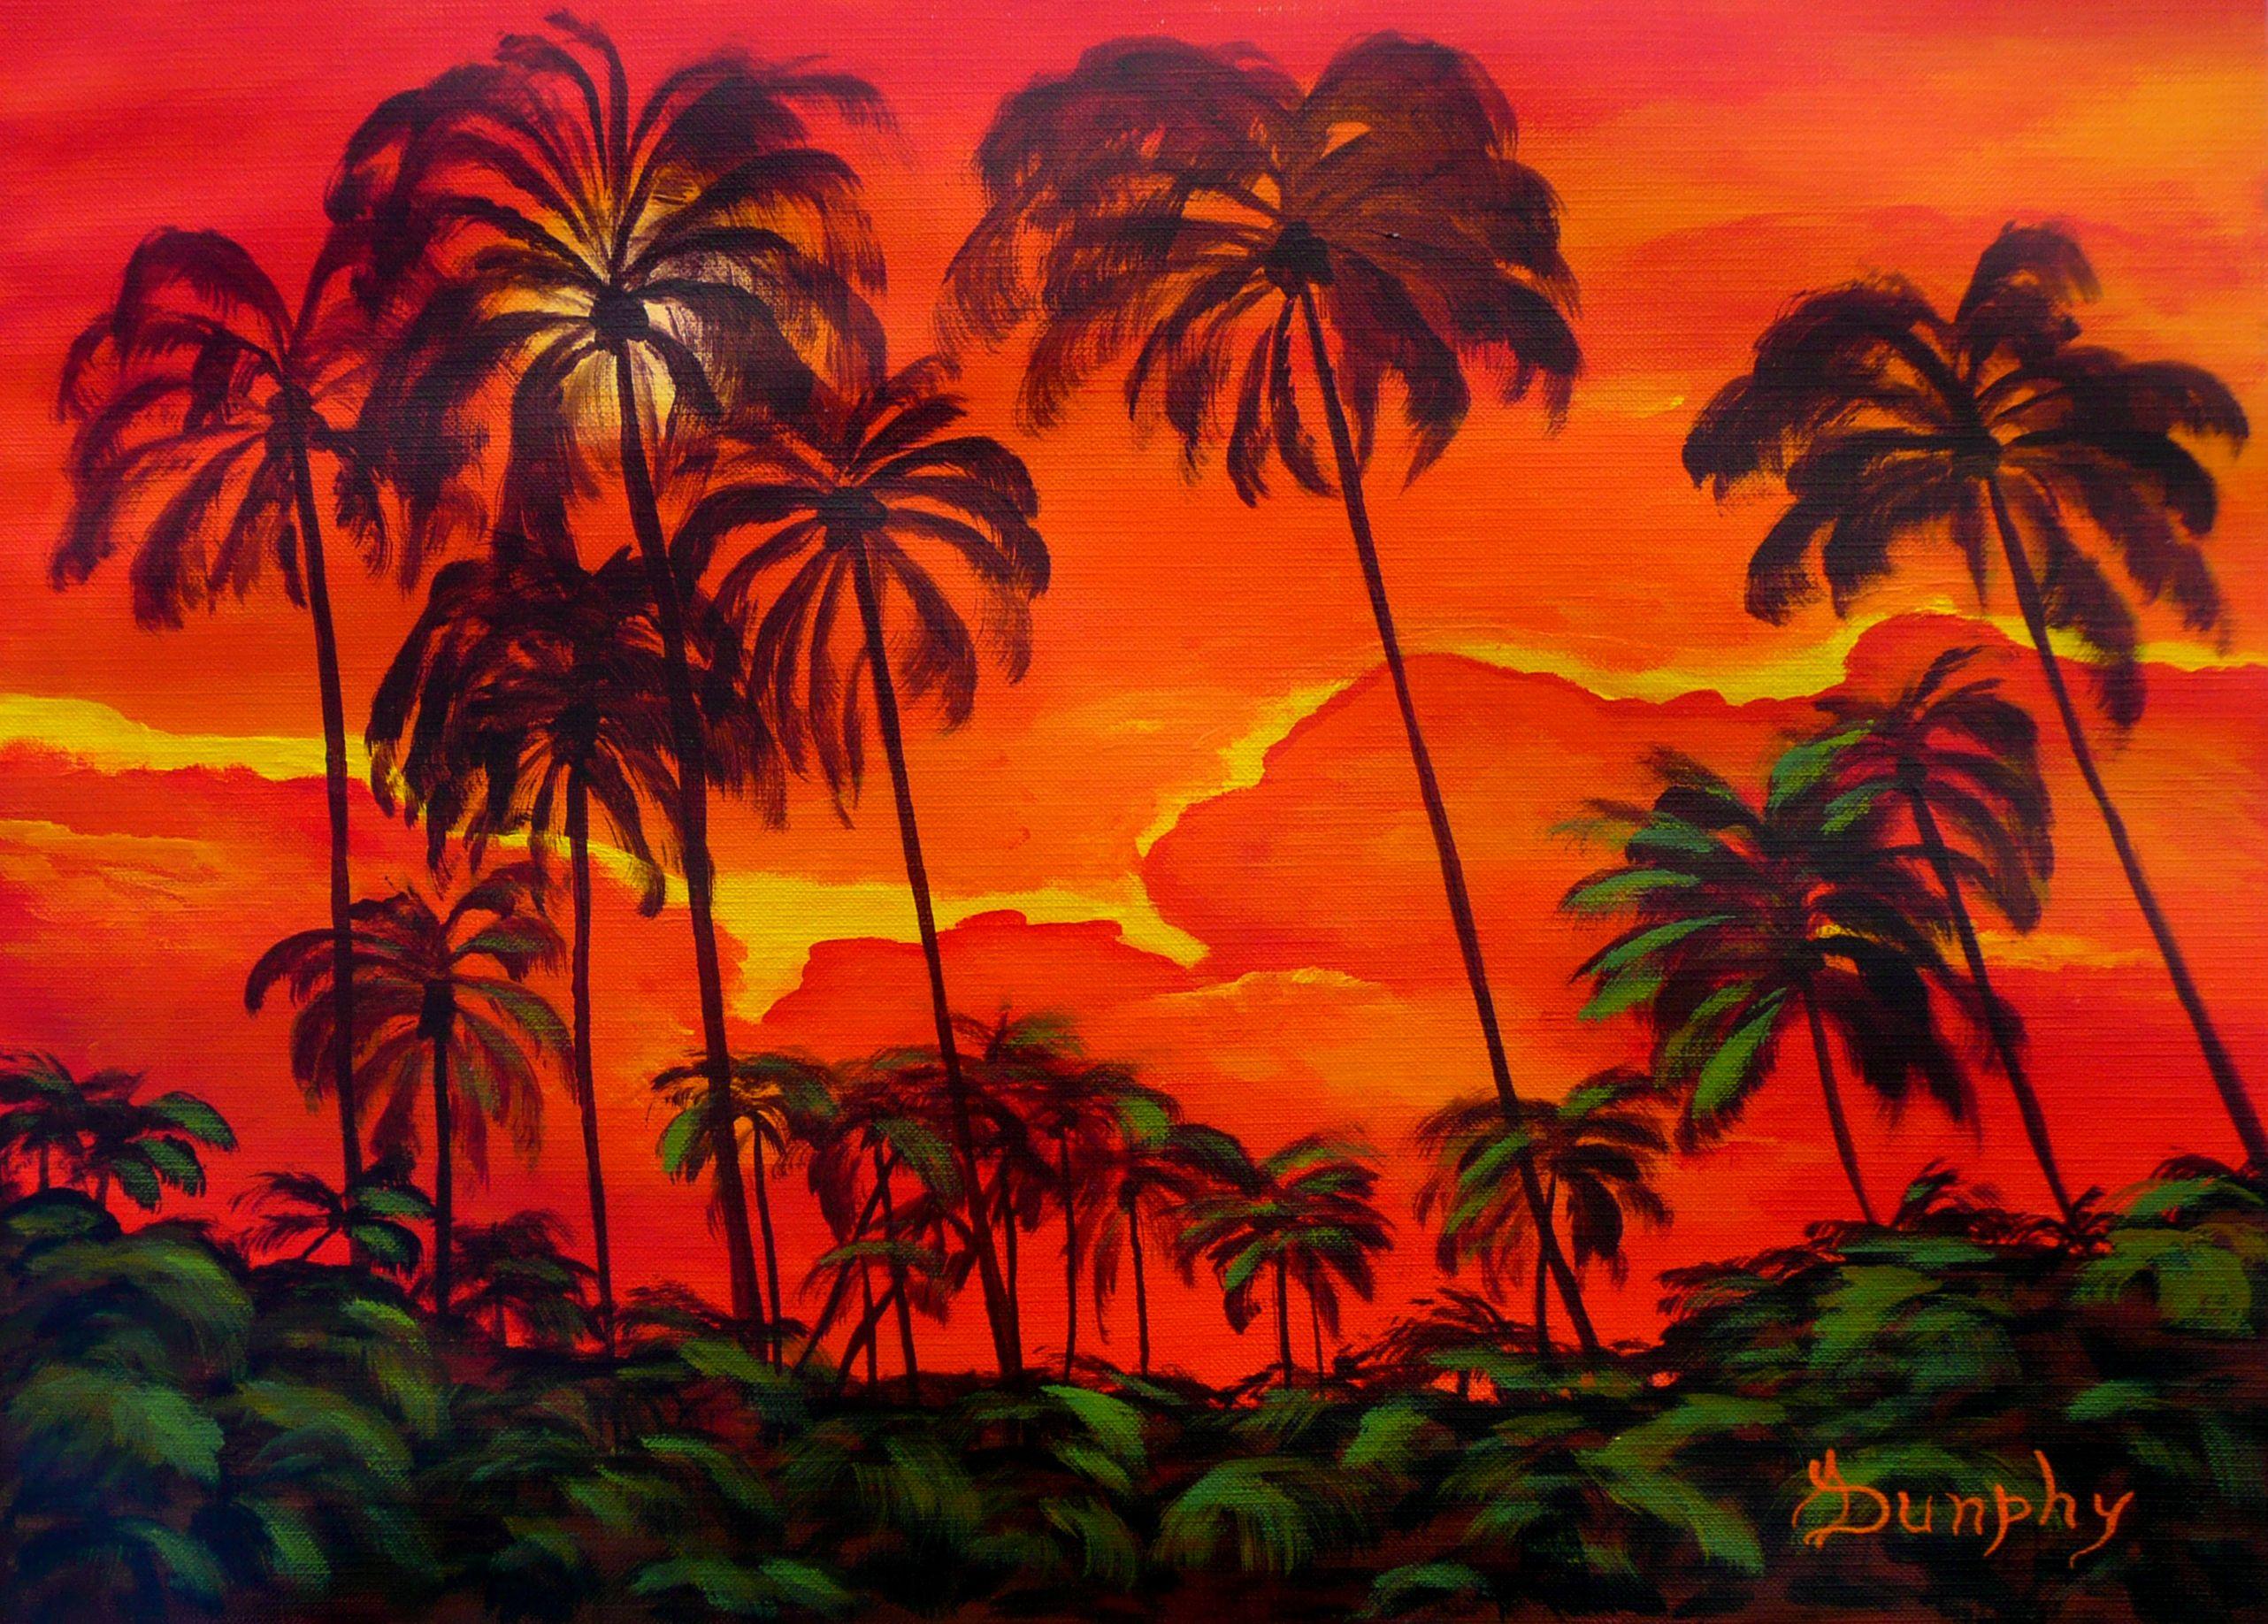 This painting is the fourth in my series from reference shots I took recently on Oahu, Hawaii. I love the sky at sunset. The reds, yellows and oranges make a magical scene.     This painting was created using professional grade acrylics on 118lb